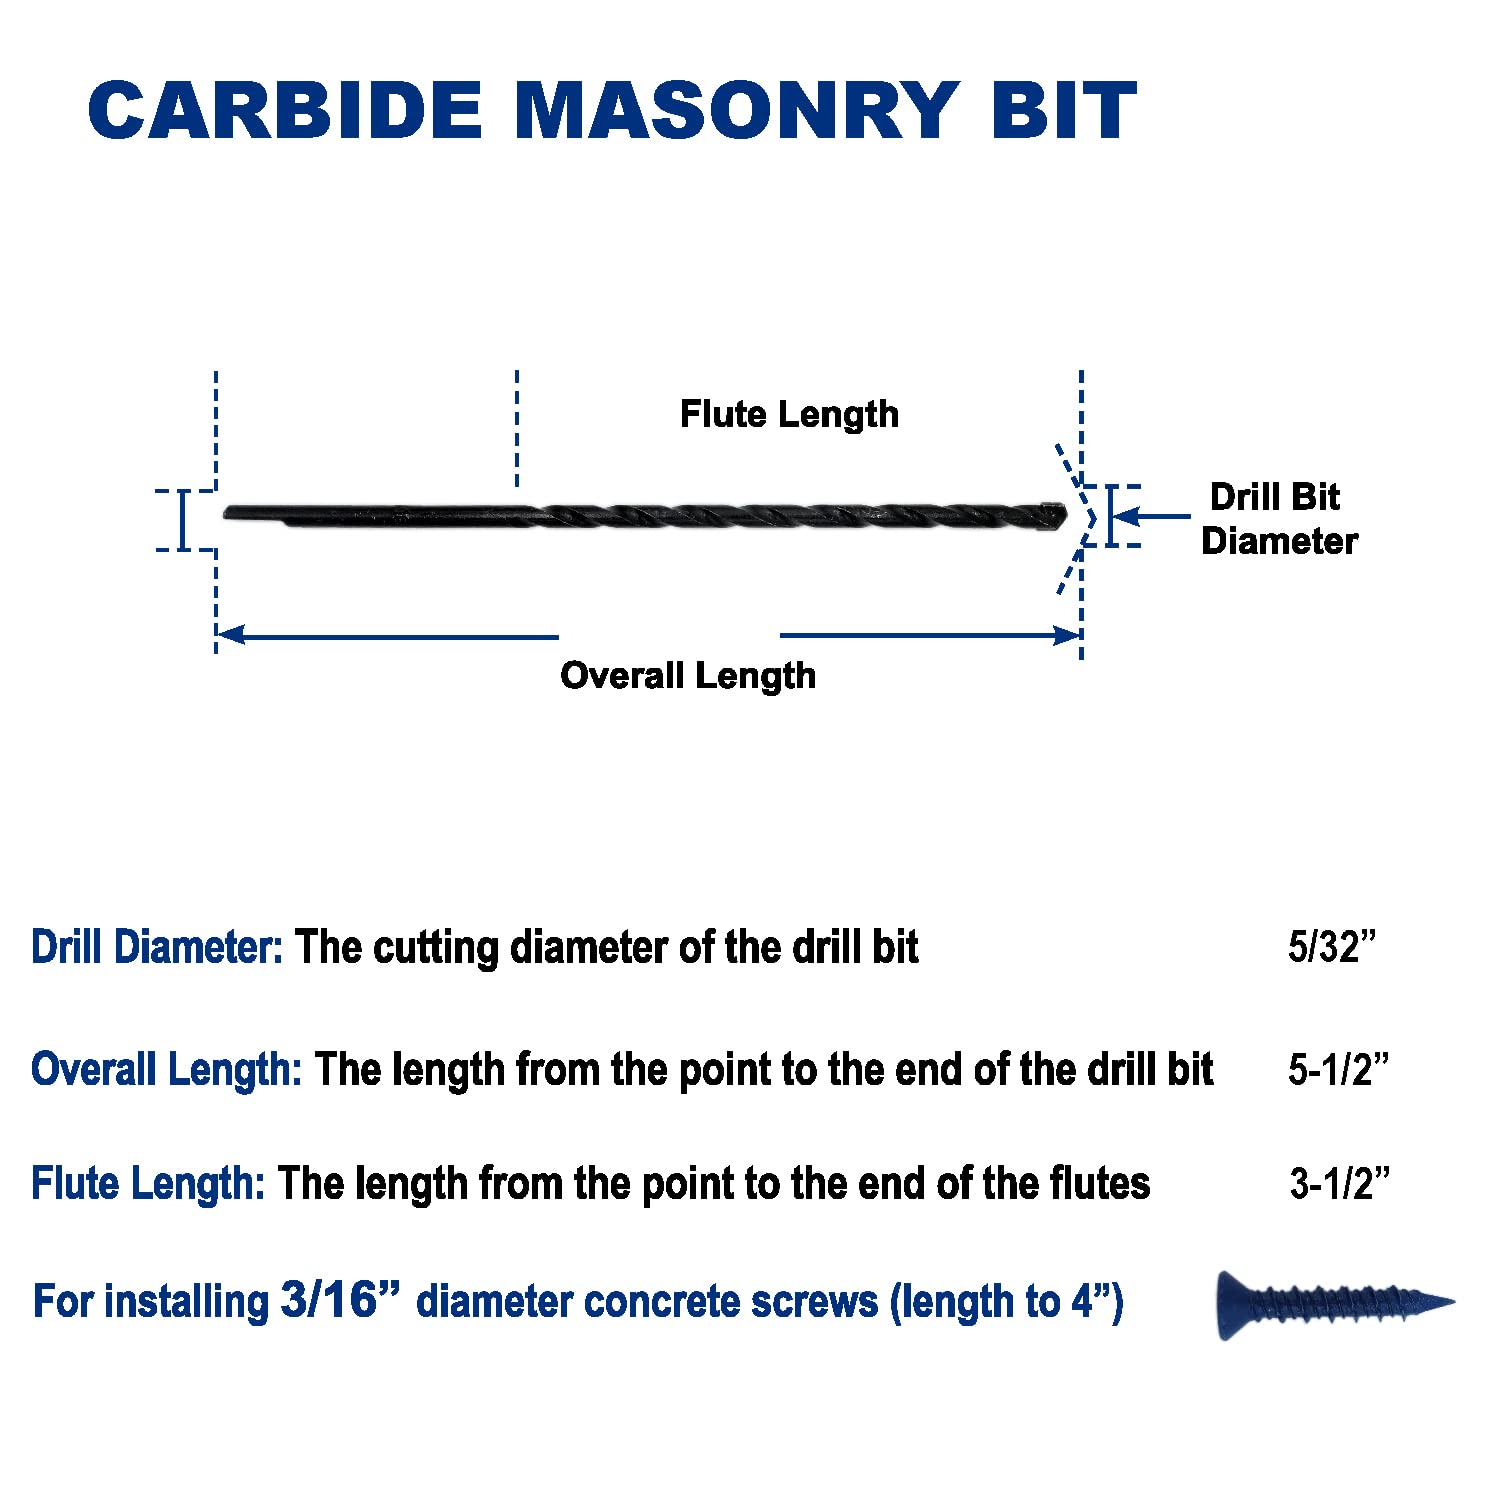 5/32-Inch Carbide-Tipped Masonry Drill Bit for Concrete, Block, Brick, Pack of 6